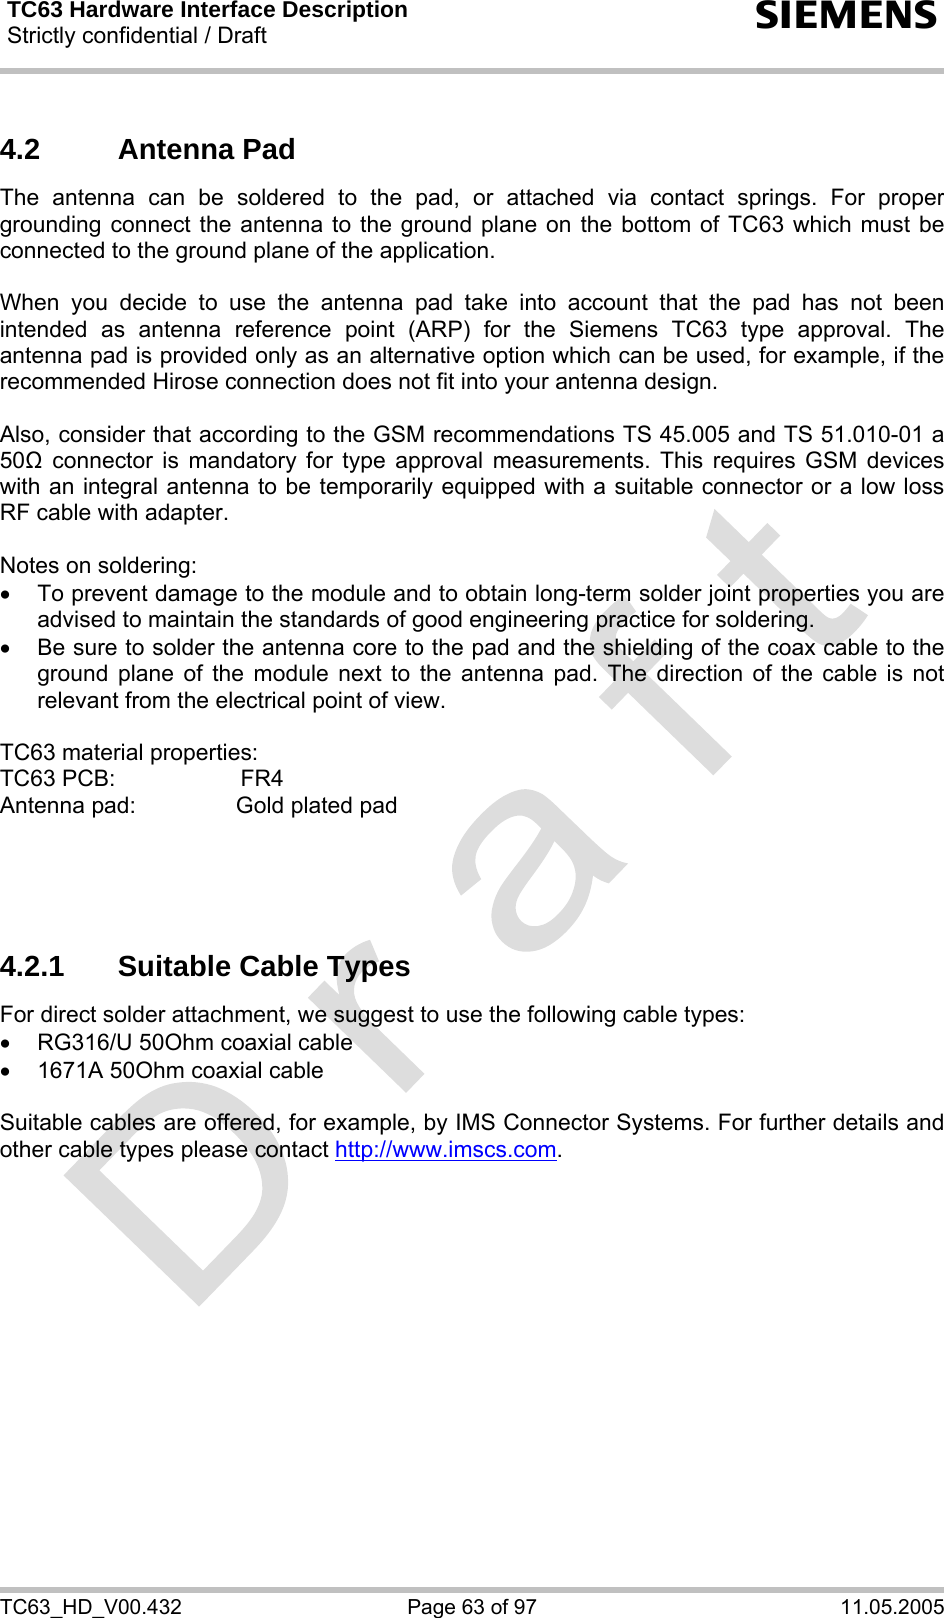 TC63 Hardware Interface Description Strictly confidential / Draft  s TC63_HD_V00.432  Page 63 of 97  11.05.2005 4.2 Antenna Pad The antenna can be soldered to the pad, or attached via contact springs. For proper grounding connect the antenna to the ground plane on the bottom of TC63 which must be connected to the ground plane of the application.  When you decide to use the antenna pad take into account that the pad has not been intended as antenna reference point (ARP) for the Siemens TC63 type approval. The antenna pad is provided only as an alternative option which can be used, for example, if the recommended Hirose connection does not fit into your antenna design.   Also, consider that according to the GSM recommendations TS 45.005 and TS 51.010-01 a 50 connector is mandatory for type approval measurements. This requires GSM devices with an integral antenna to be temporarily equipped with a suitable connector or a low loss RF cable with adapter.   Notes on soldering: •  To prevent damage to the module and to obtain long-term solder joint properties you are advised to maintain the standards of good engineering practice for soldering. •  Be sure to solder the antenna core to the pad and the shielding of the coax cable to the ground plane of the module next to the antenna pad. The direction of the cable is not relevant from the electrical point of view.  TC63 material properties: TC63 PCB:        FR4 Antenna pad:   Gold plated pad     4.2.1  Suitable Cable Types For direct solder attachment, we suggest to use the following cable types: •  RG316/U 50Ohm coaxial cable  •  1671A 50Ohm coaxial cable  Suitable cables are offered, for example, by IMS Connector Systems. For further details and other cable types please contact http://www.imscs.com.  